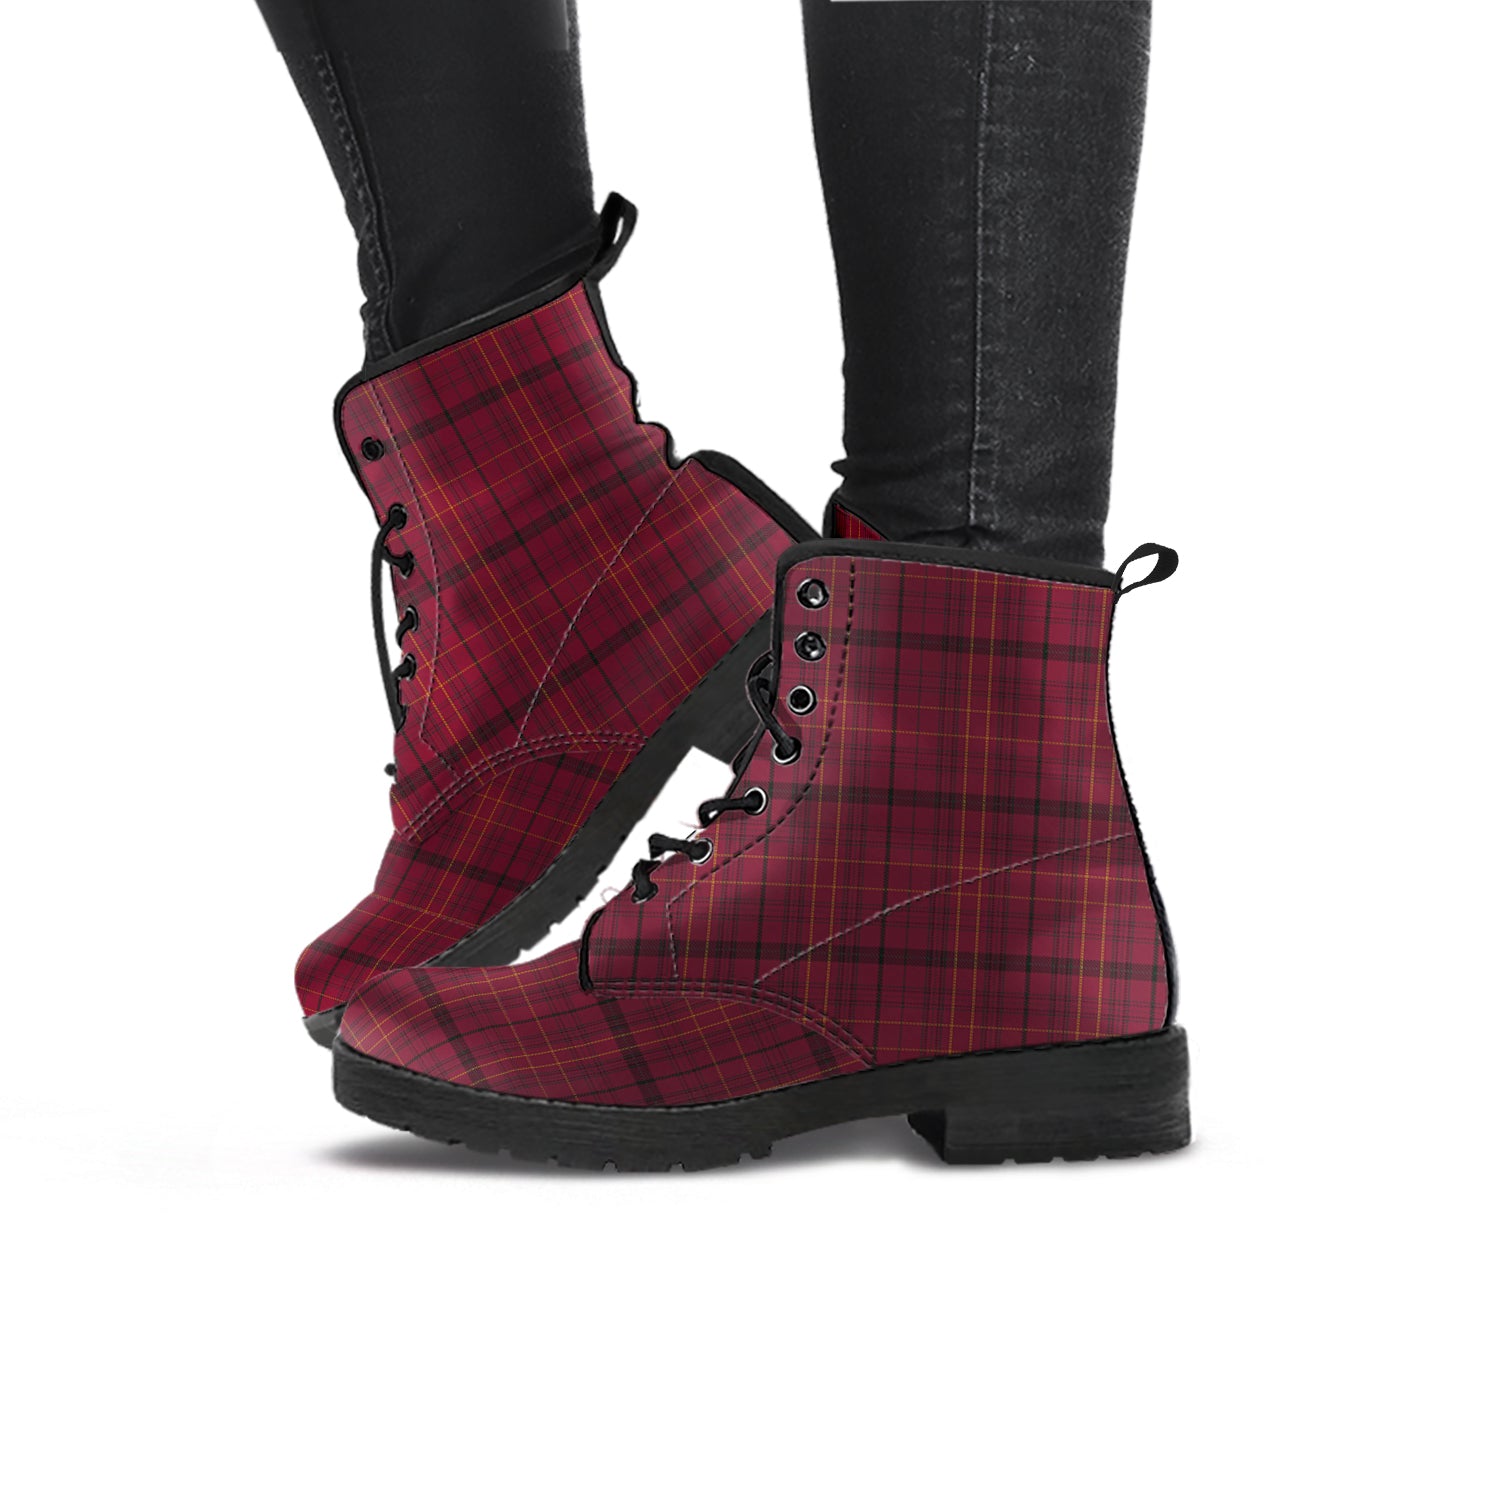 williams-of-wales-tartan-leather-boots